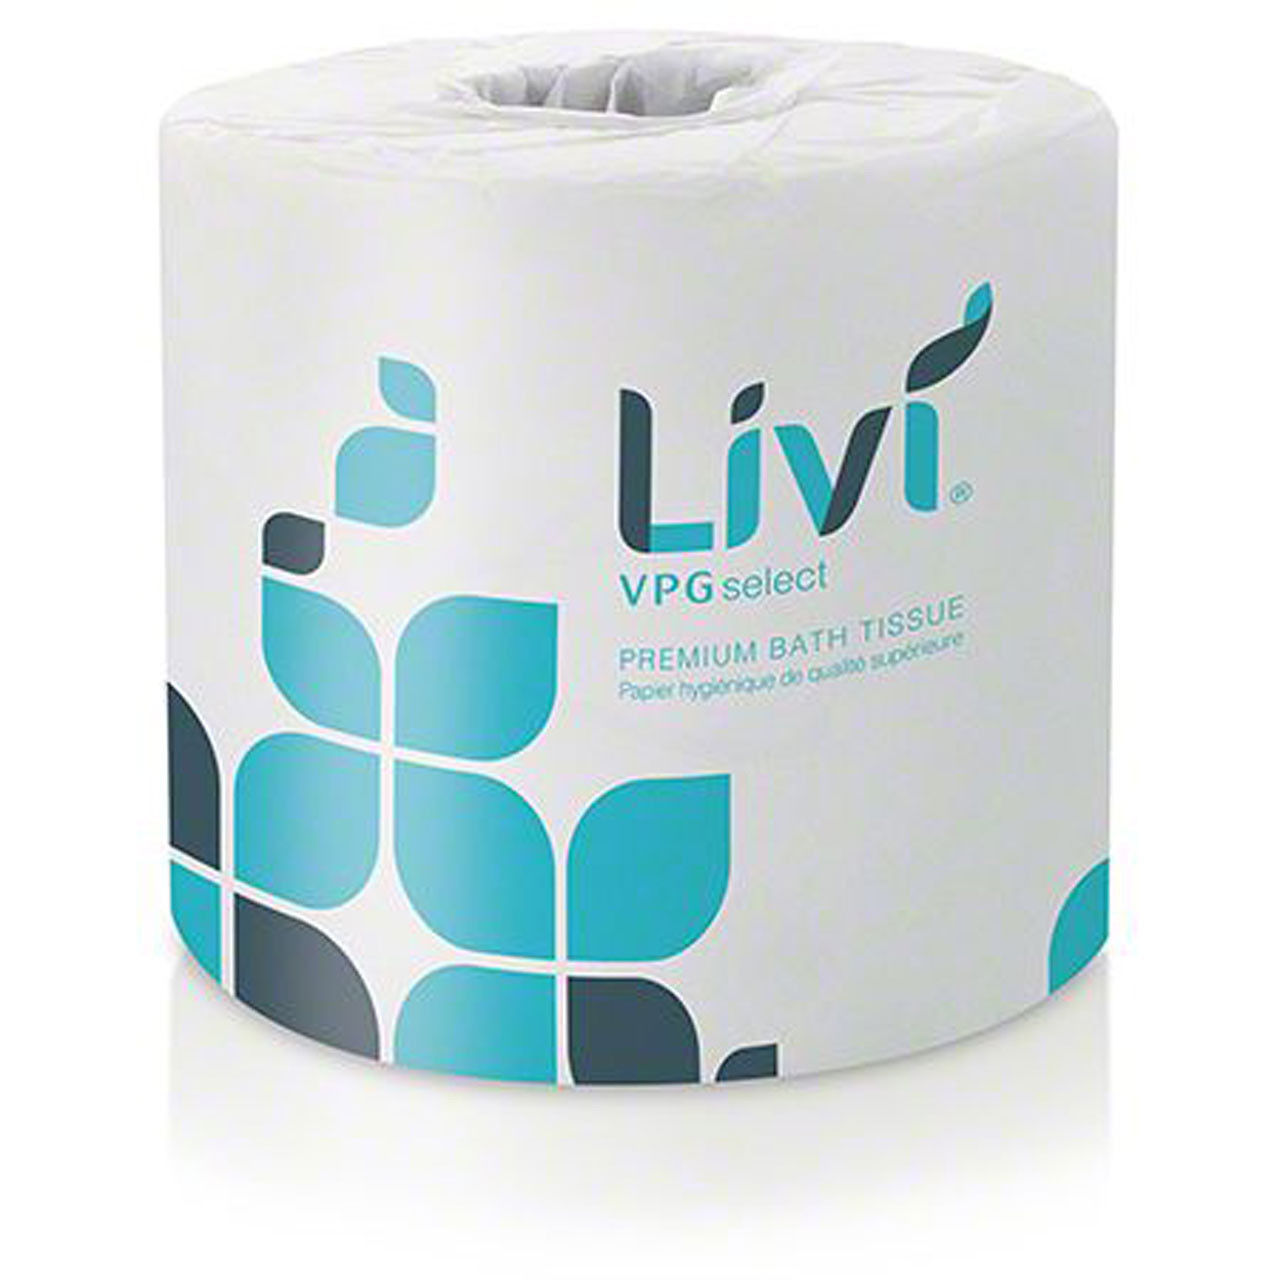 What is the texture of the Solaris Paper Livi VPG Select Toilet Tissue 2/ply?